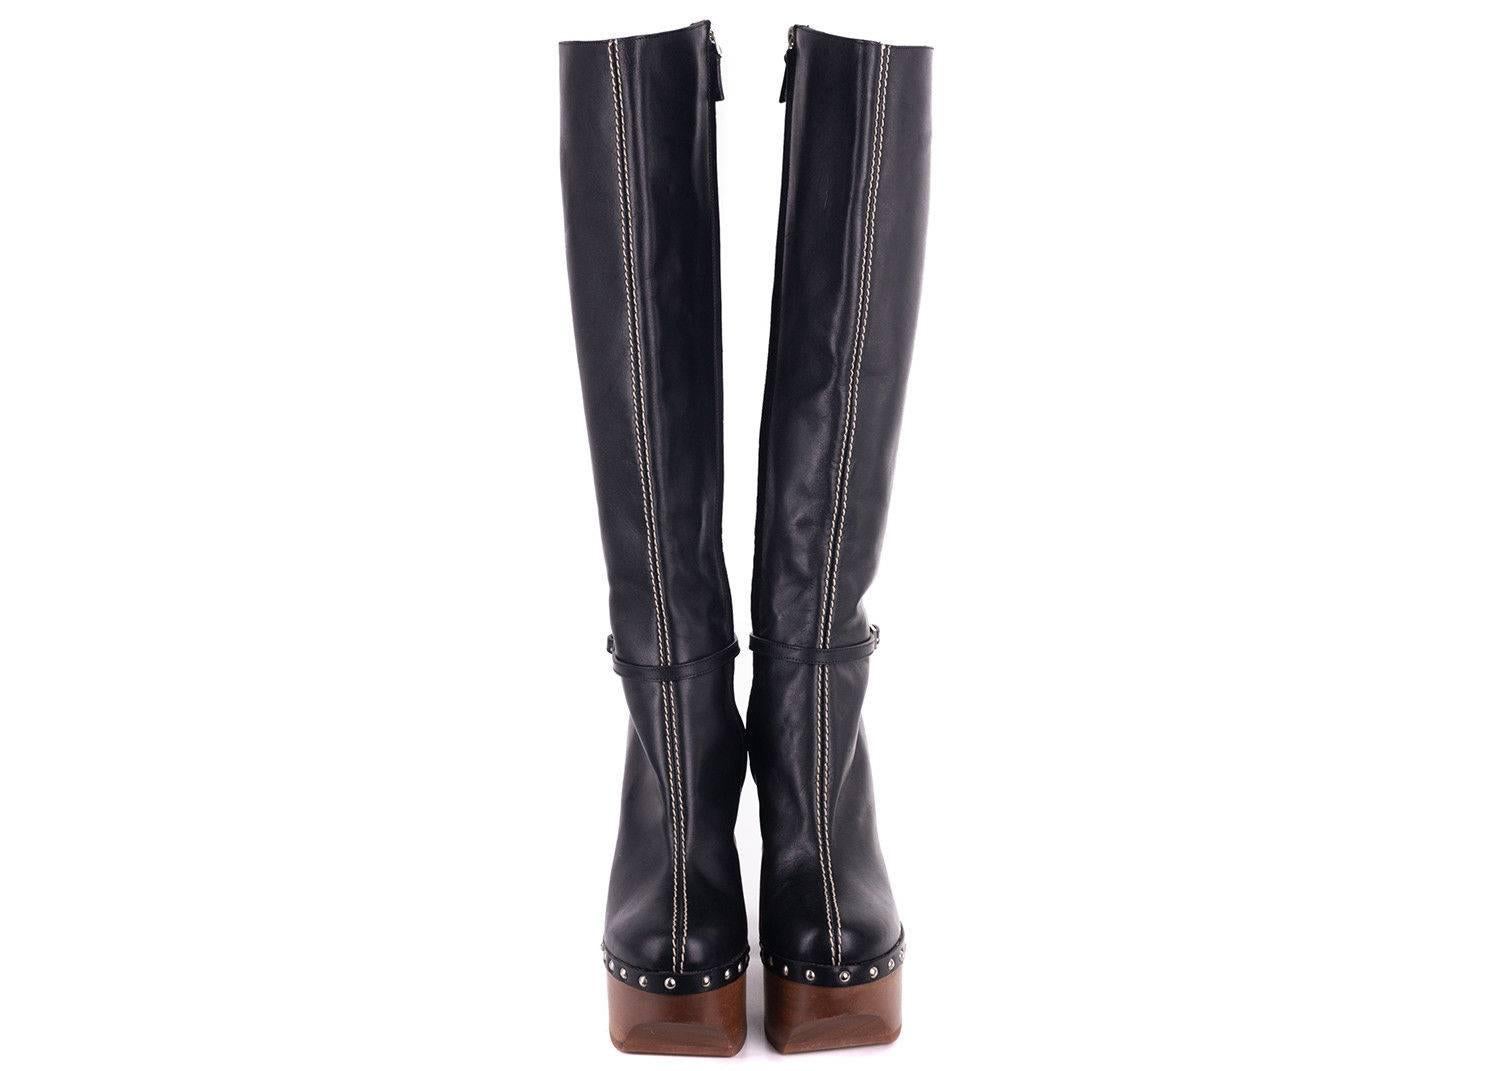 Brand New Roberto Cavalli Knee High Boots
Original Box not Included with purchase

Retails in Stores and online for $2850

Roberto Cavalli's black leather over the knee boots featuring a Silver Studded Detail throughout the boot. These boots are